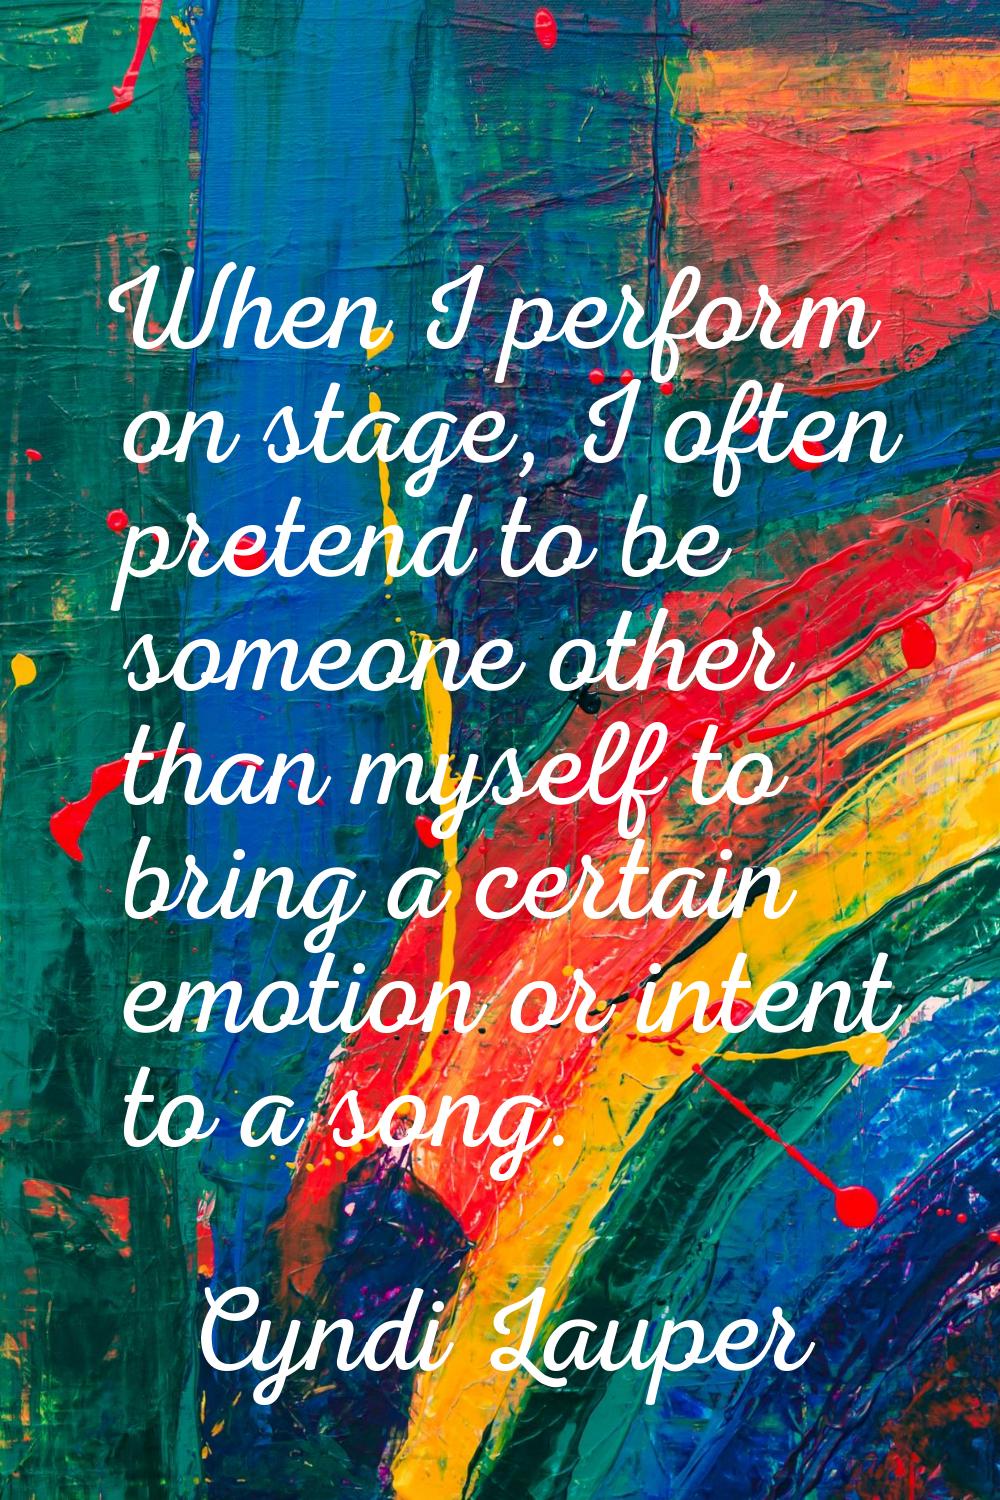 When I perform on stage, I often pretend to be someone other than myself to bring a certain emotion